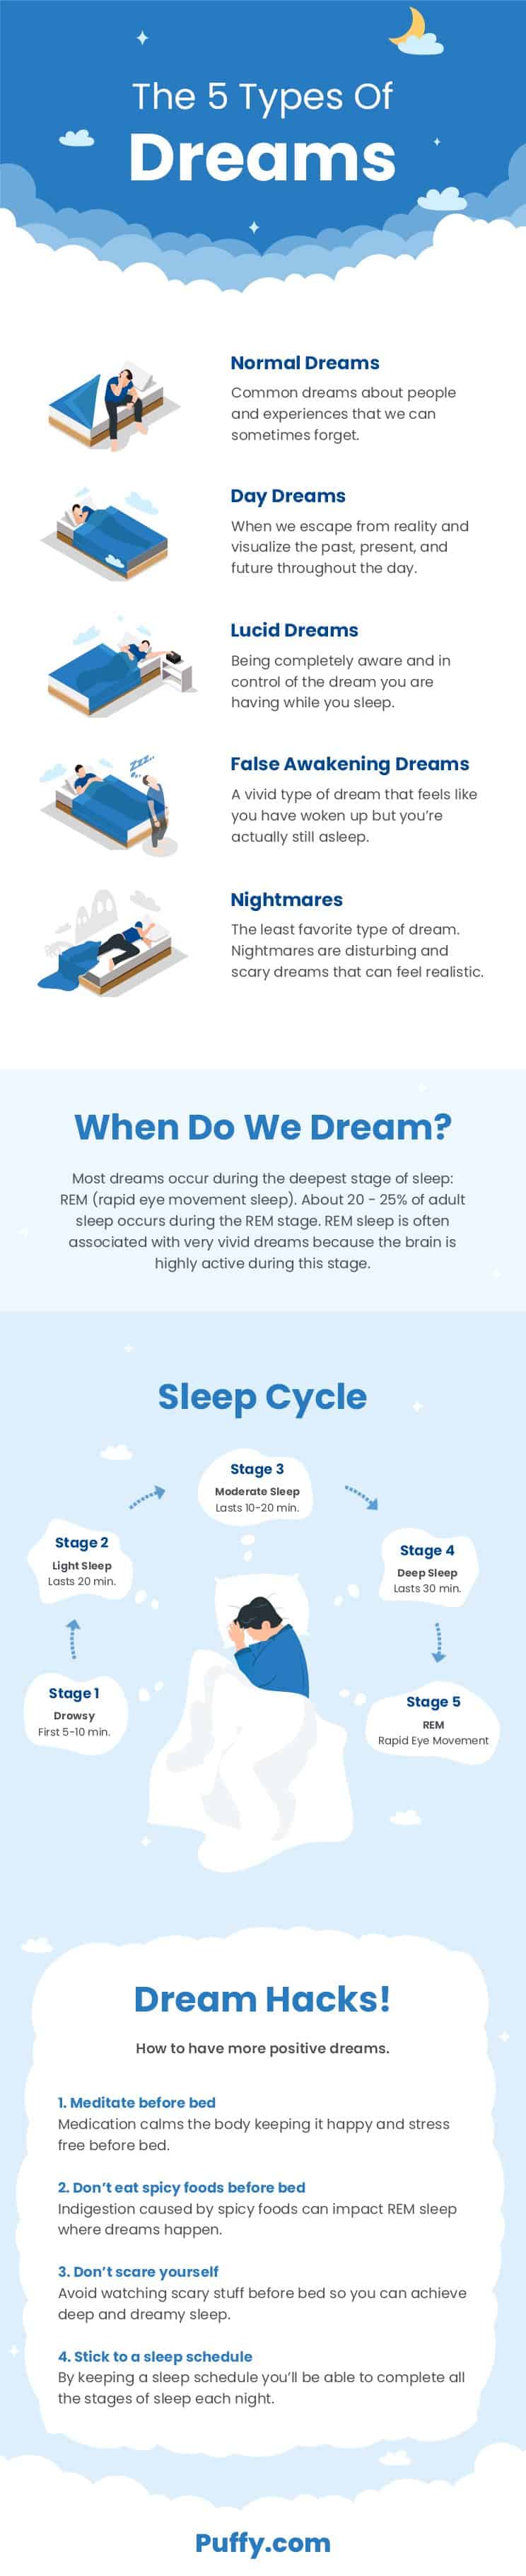 Infographic: Types Of Dreams & Nightmares